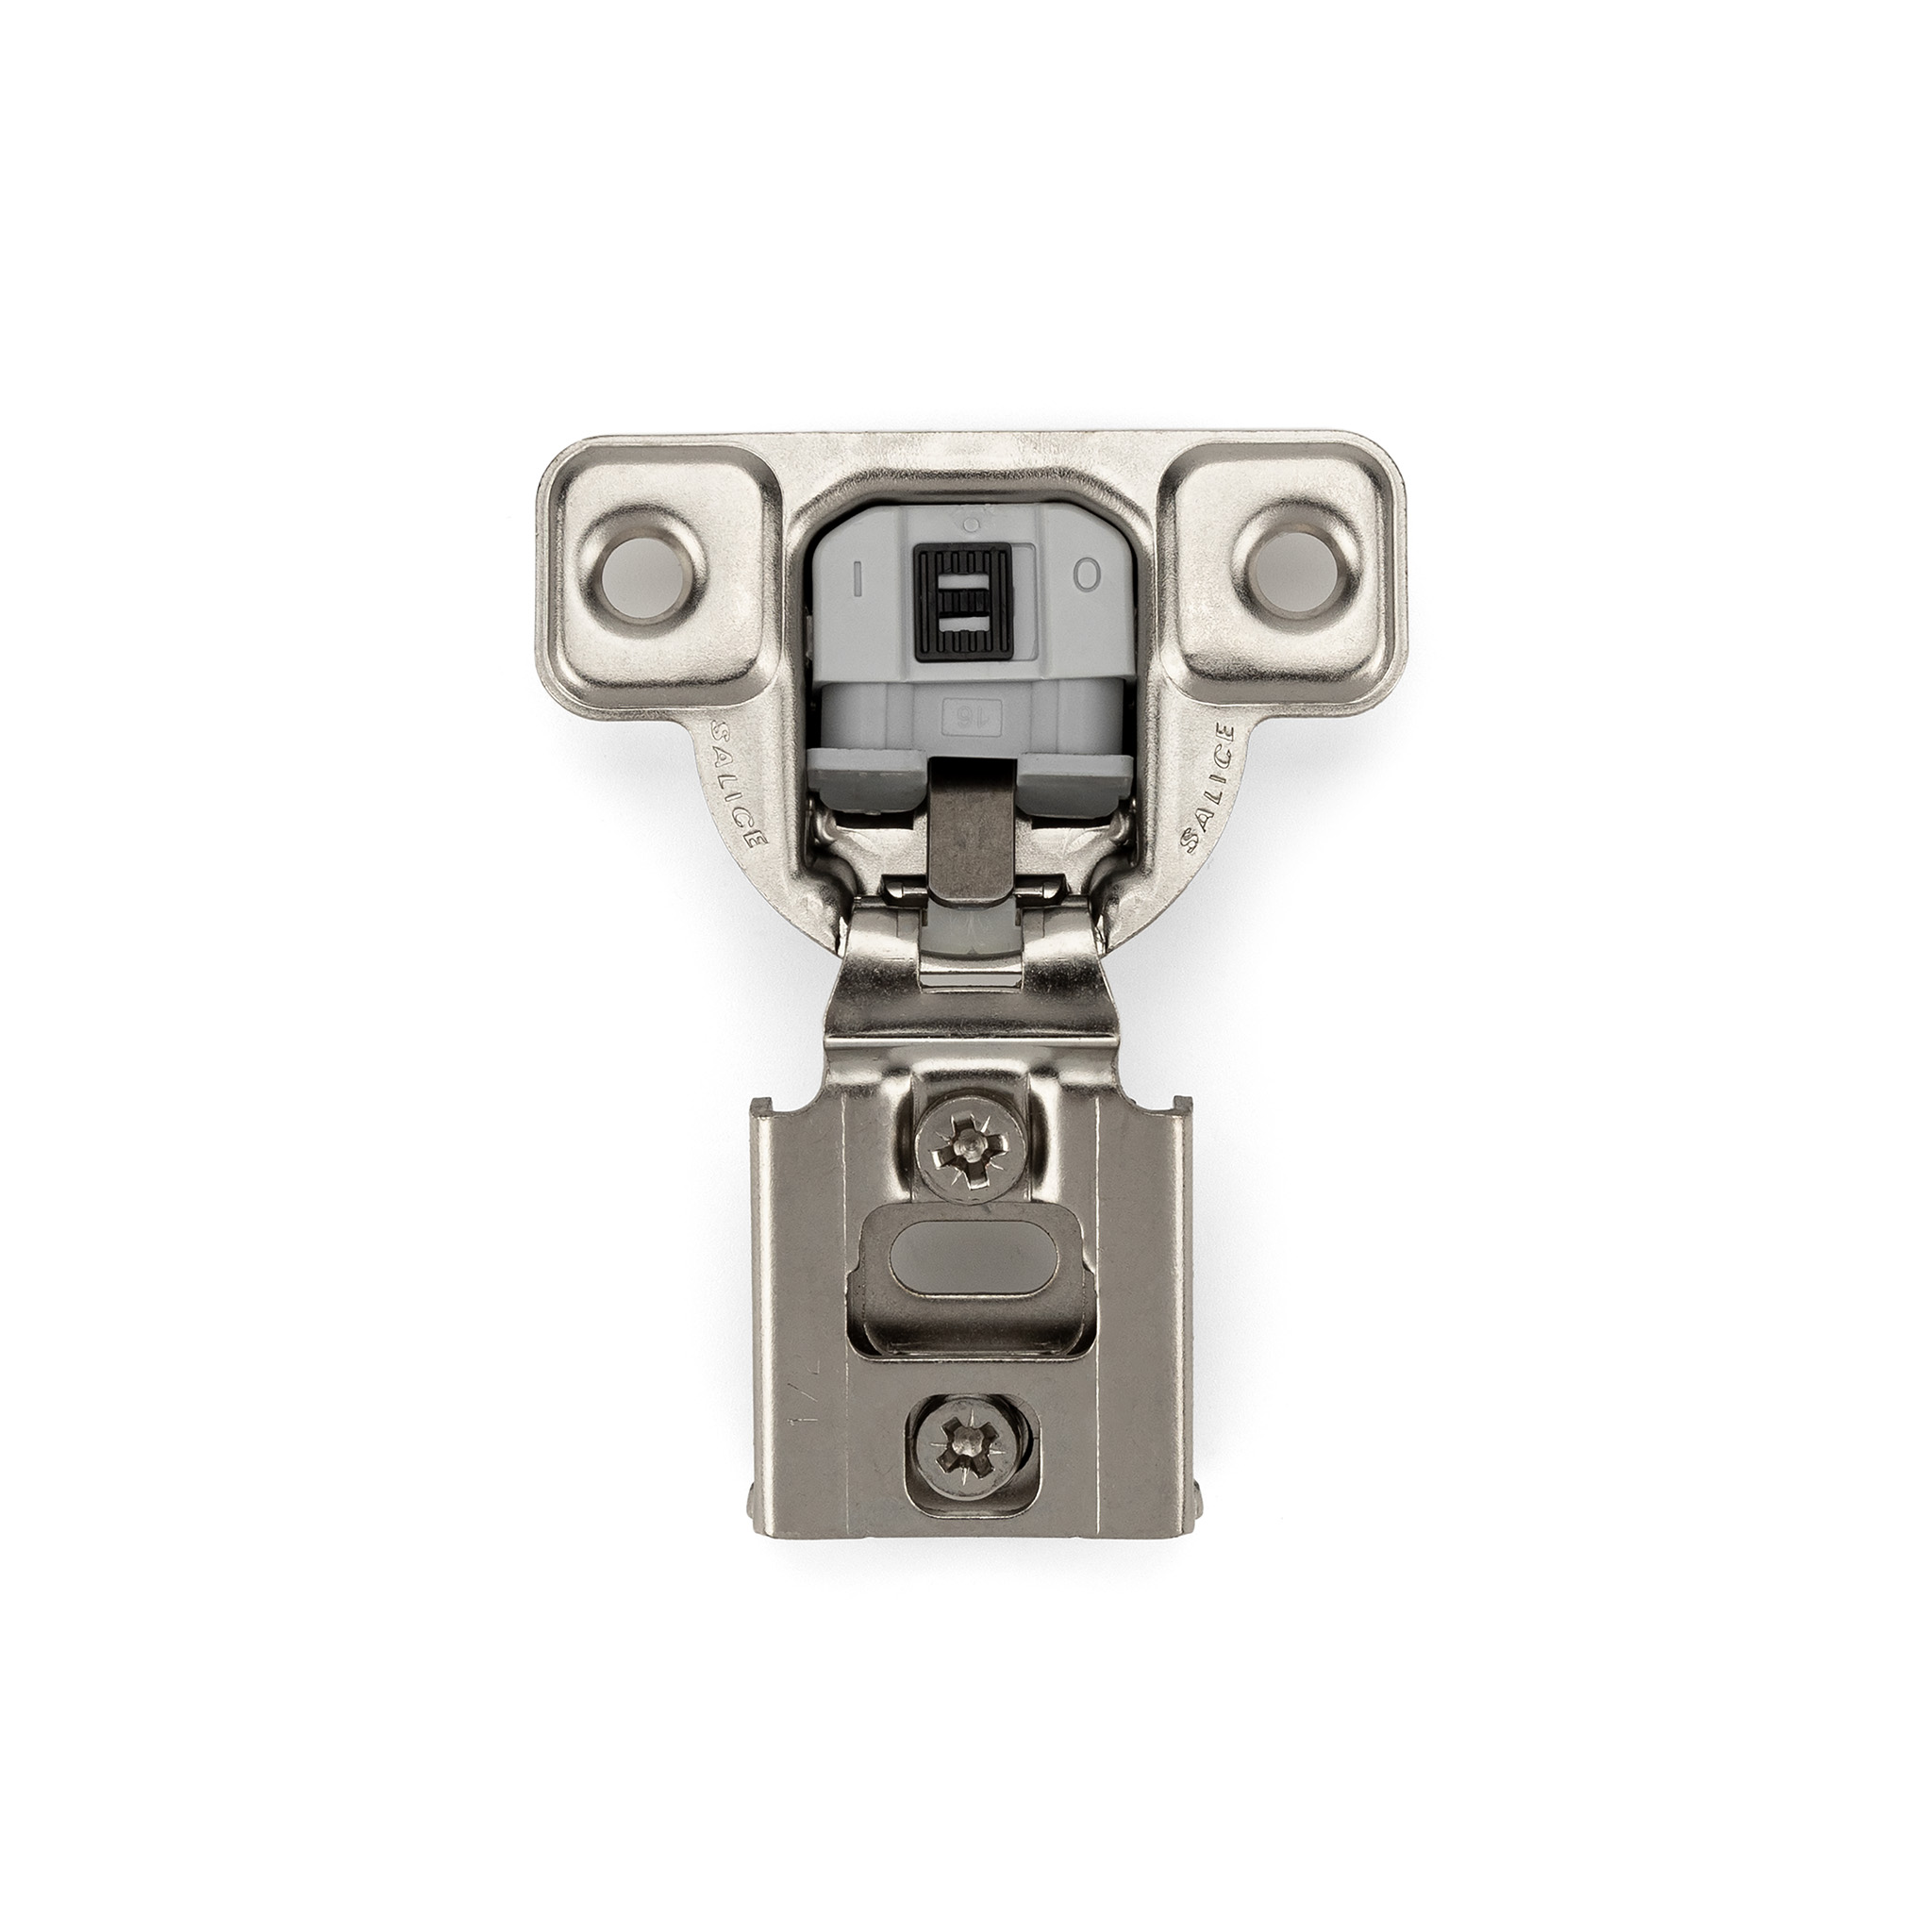 Salice Excentra Face Frame Hinge, 1/2" Overlay, 106°, Silentia Soft-Close, Screw-On.